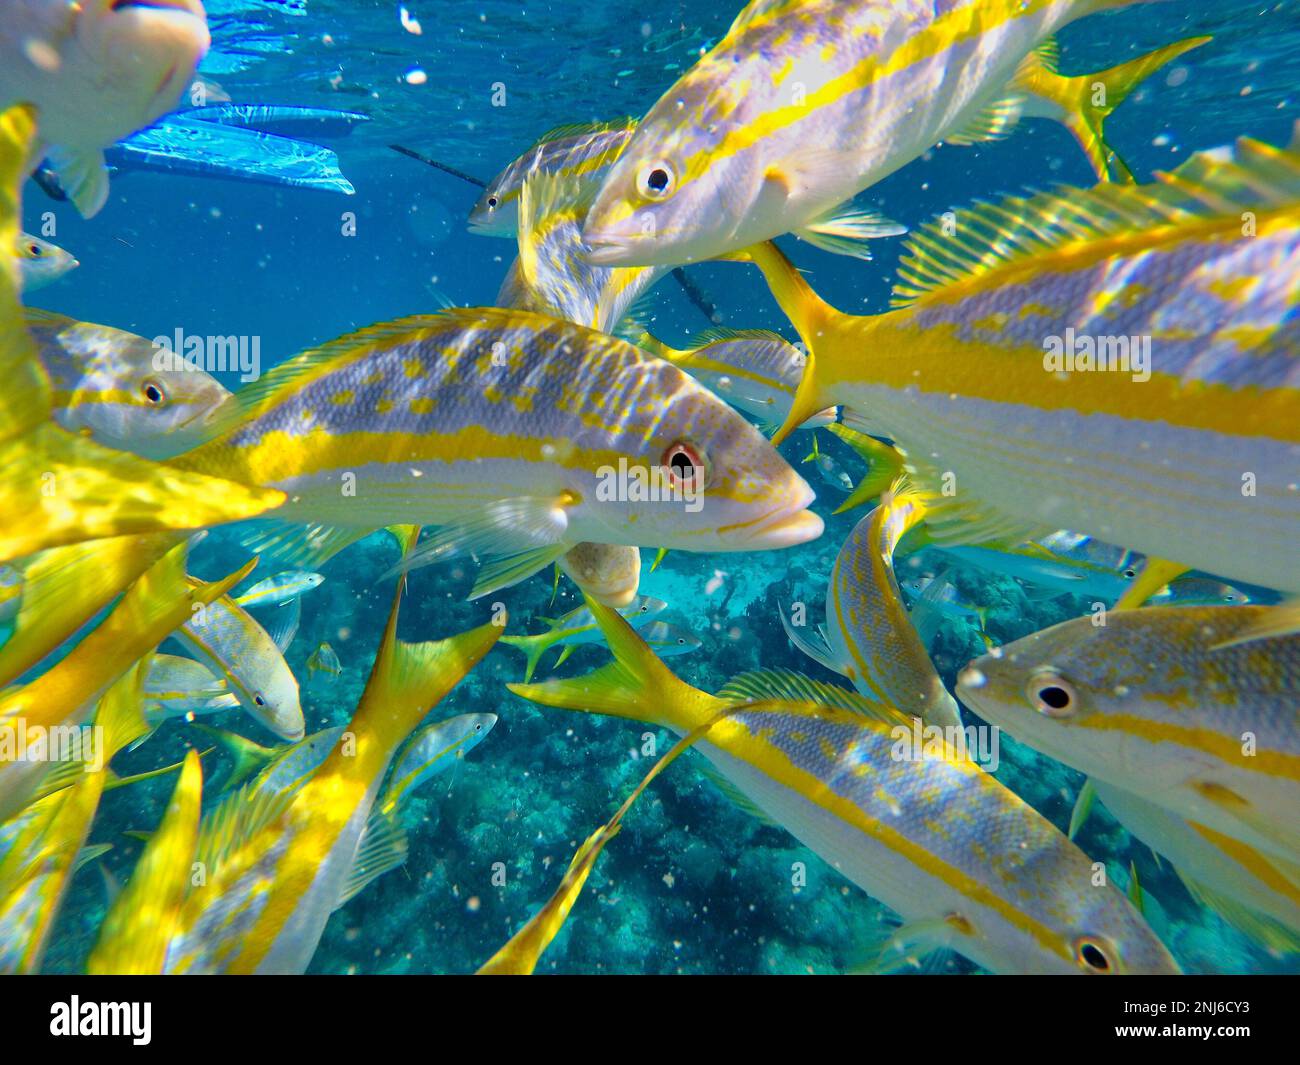 Close-up of a yellow snapper unsurrounded by other snappers in the light-sprinkled sea. Stock Photo